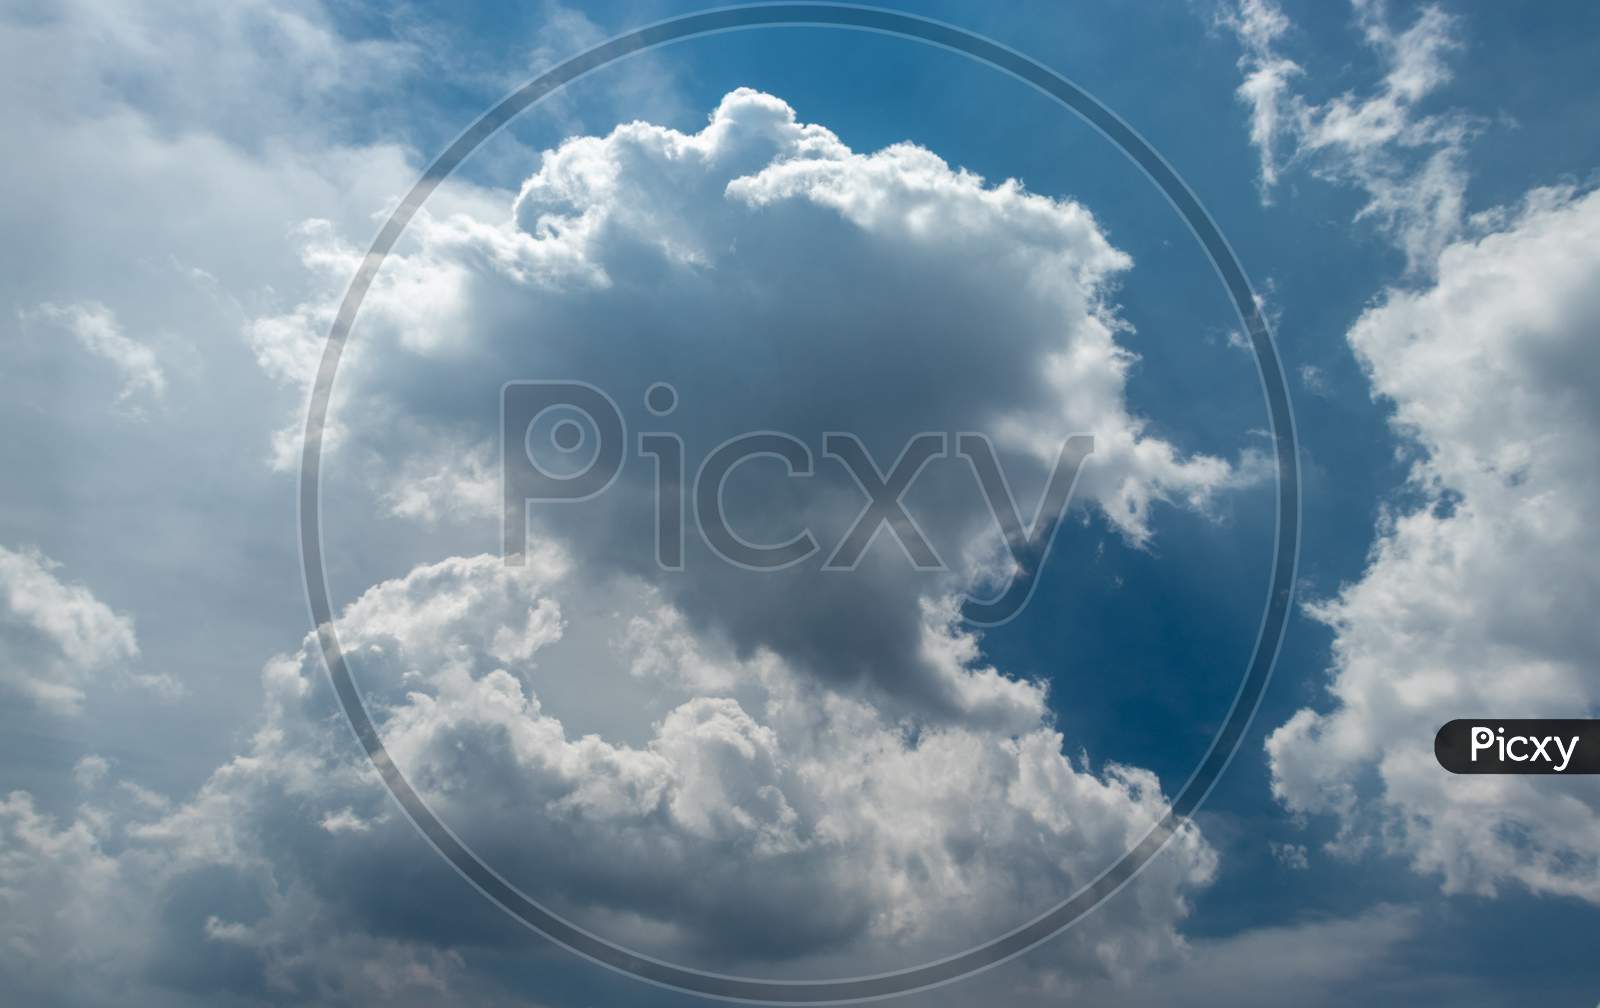 Cloud Image With Blue Sky